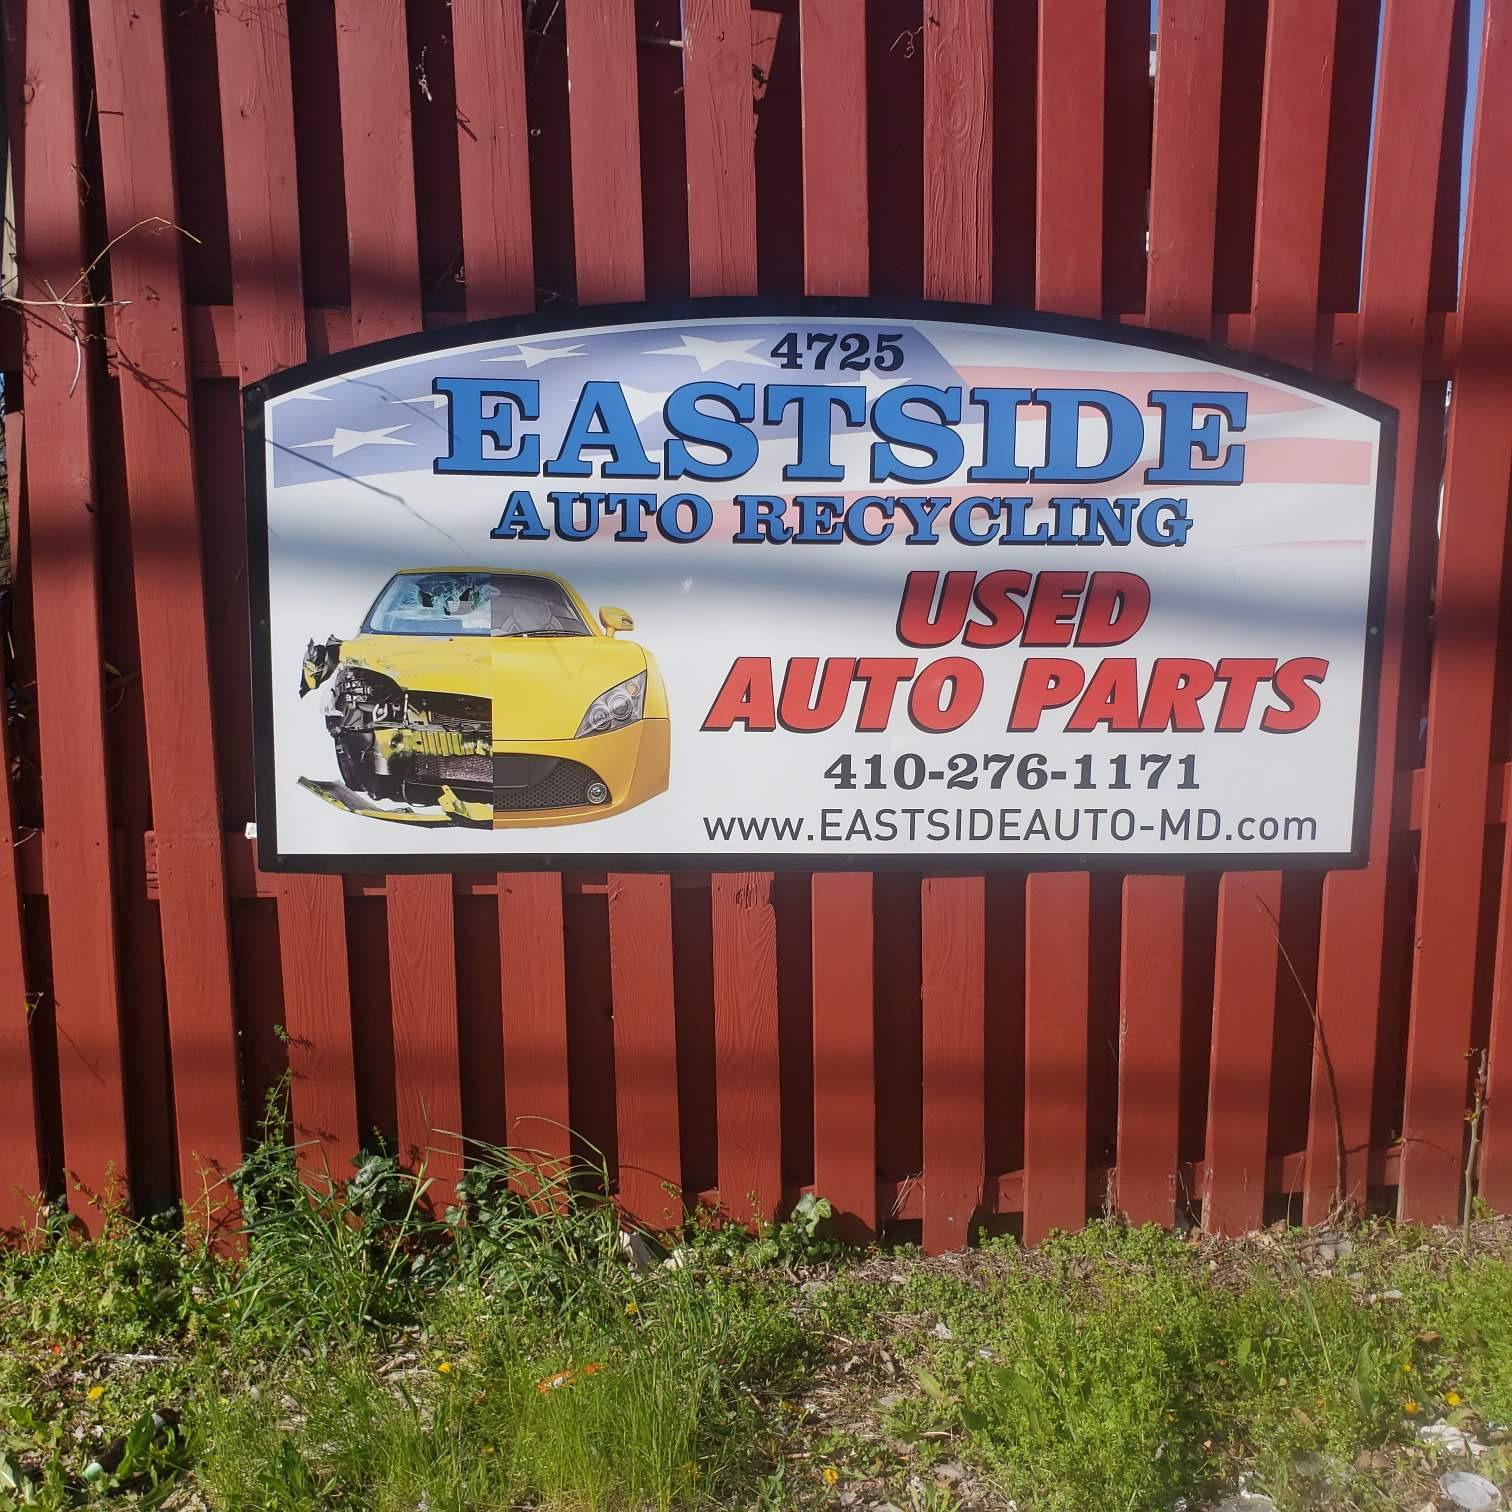 Eastside Auto Recycling - Baltimore, MD 21205 - (410)276-1171 | ShowMeLocal.com